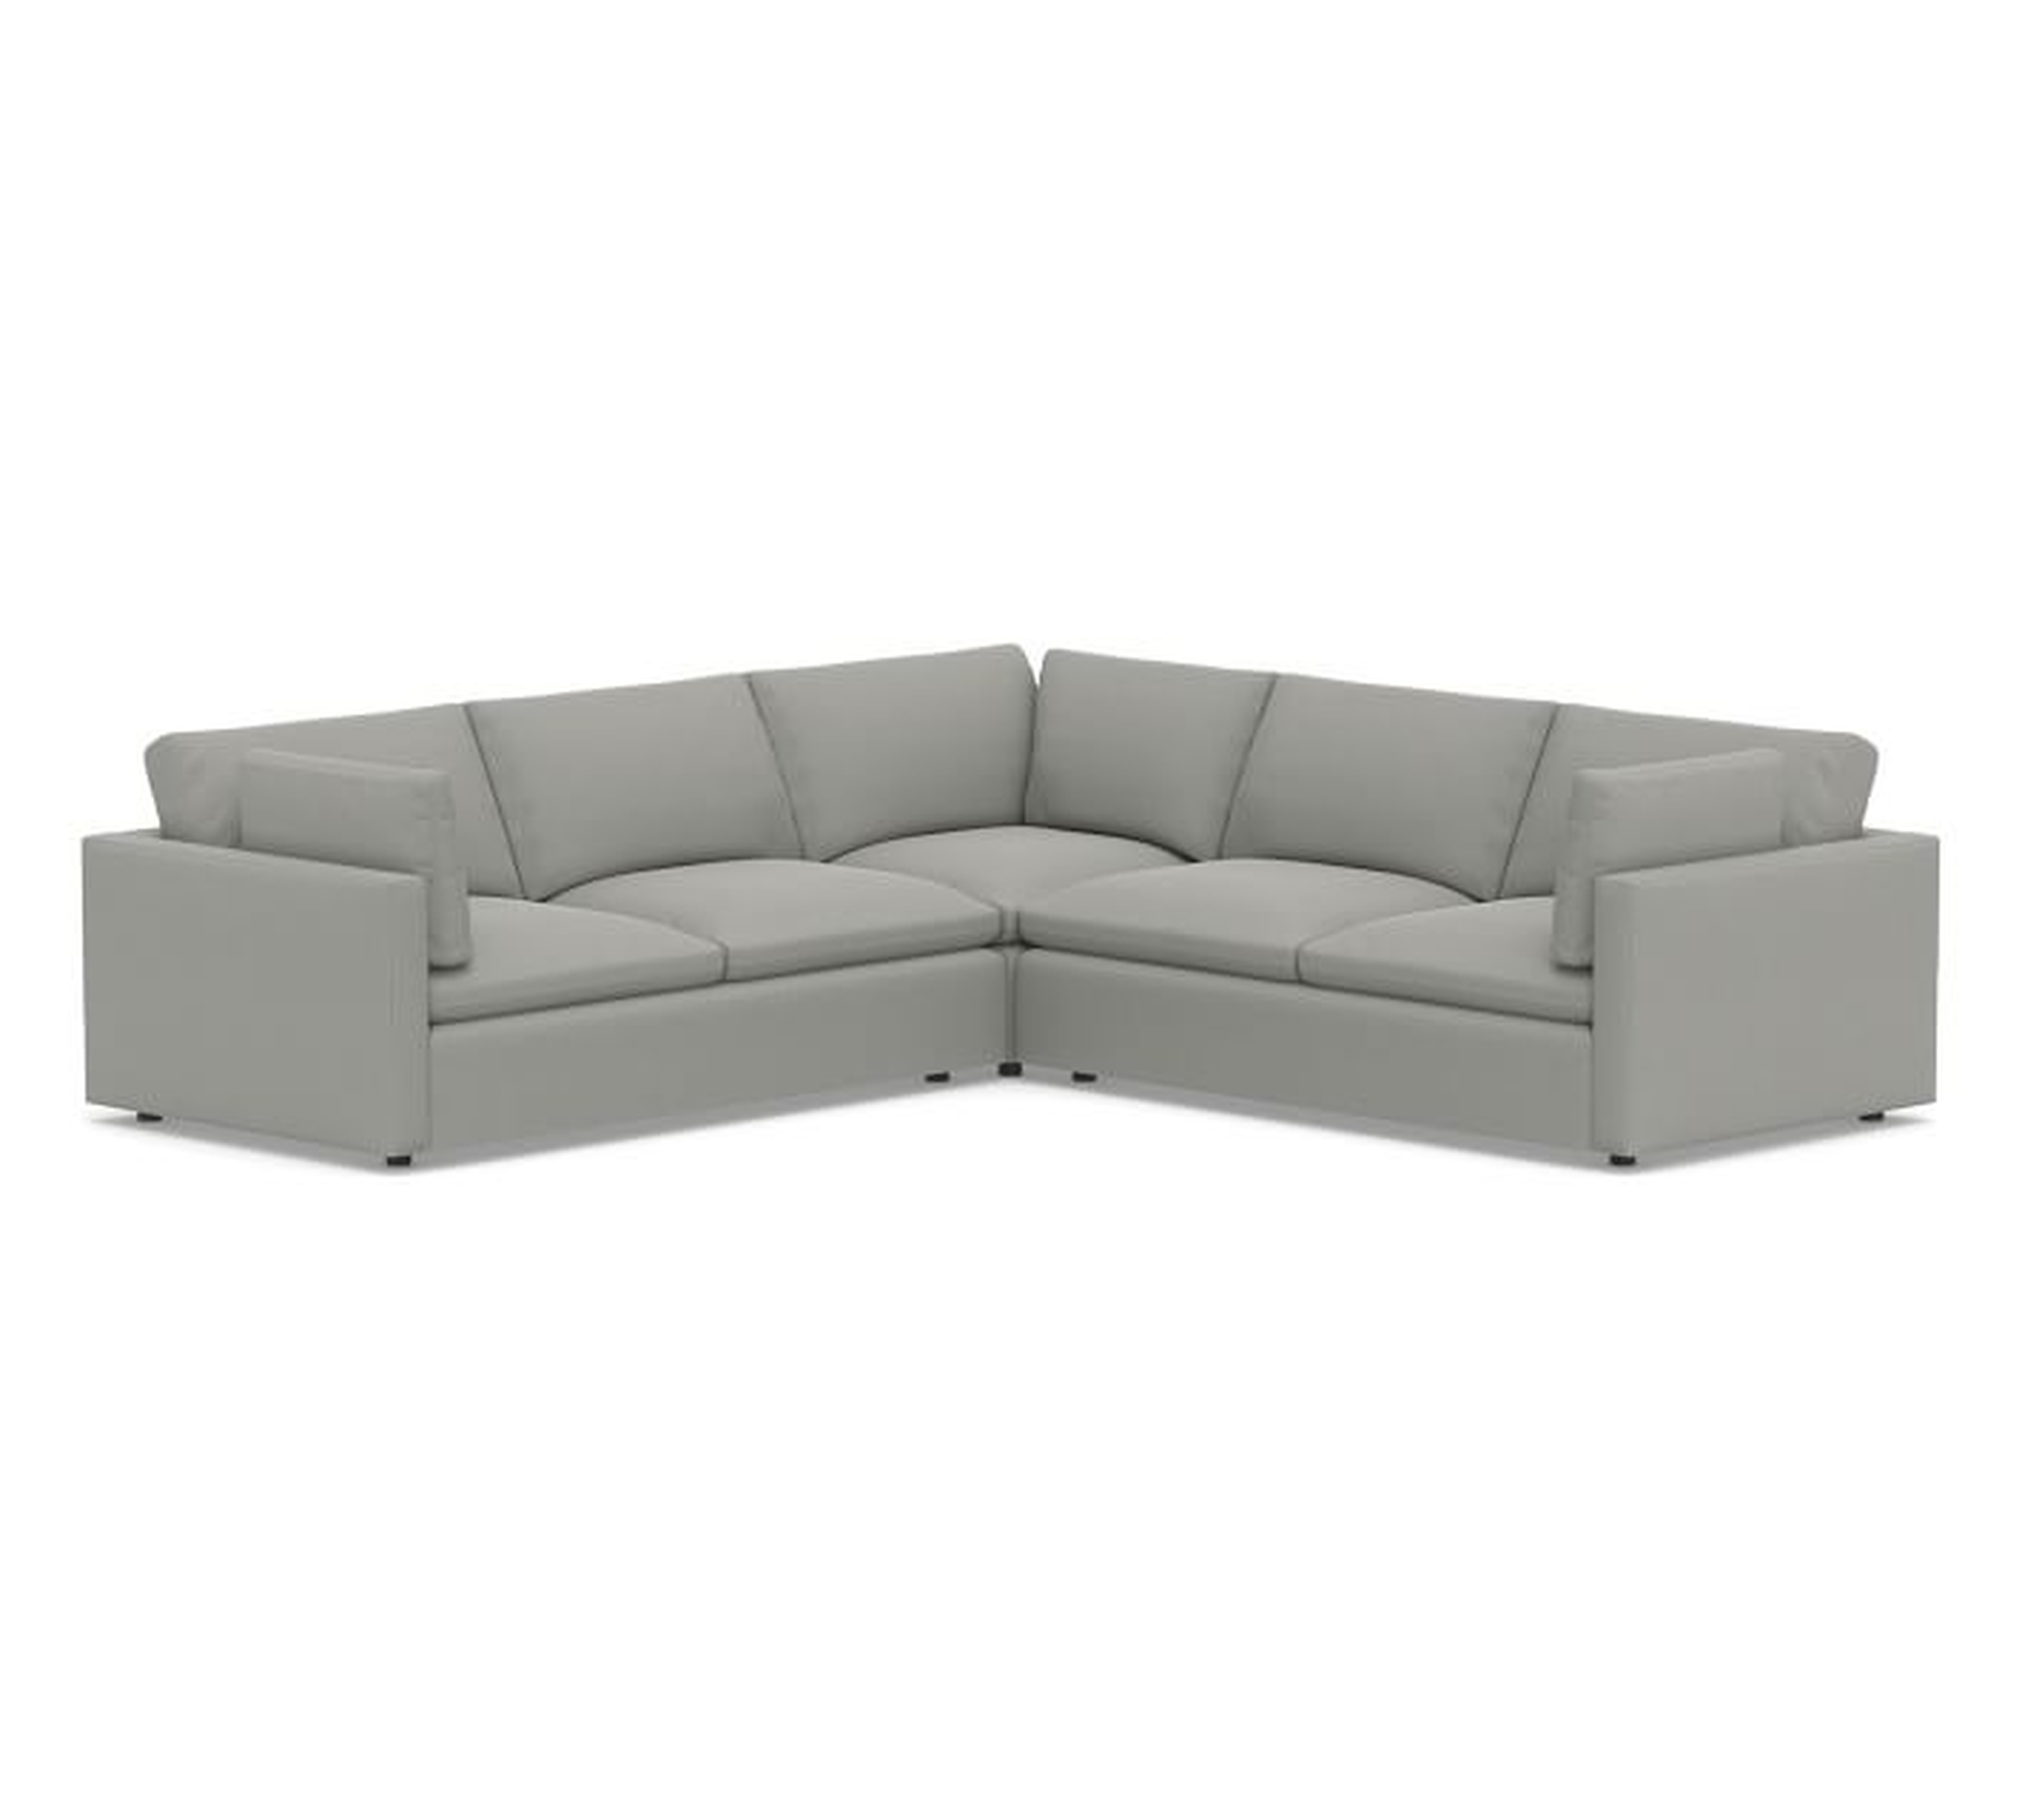 Bolinas Upholstered 3-Piece L-Shaped Corner Sectional, Down Blend Wrapped Cushions, Performance Everydaysuede(TM) Metal Gray - Pottery Barn